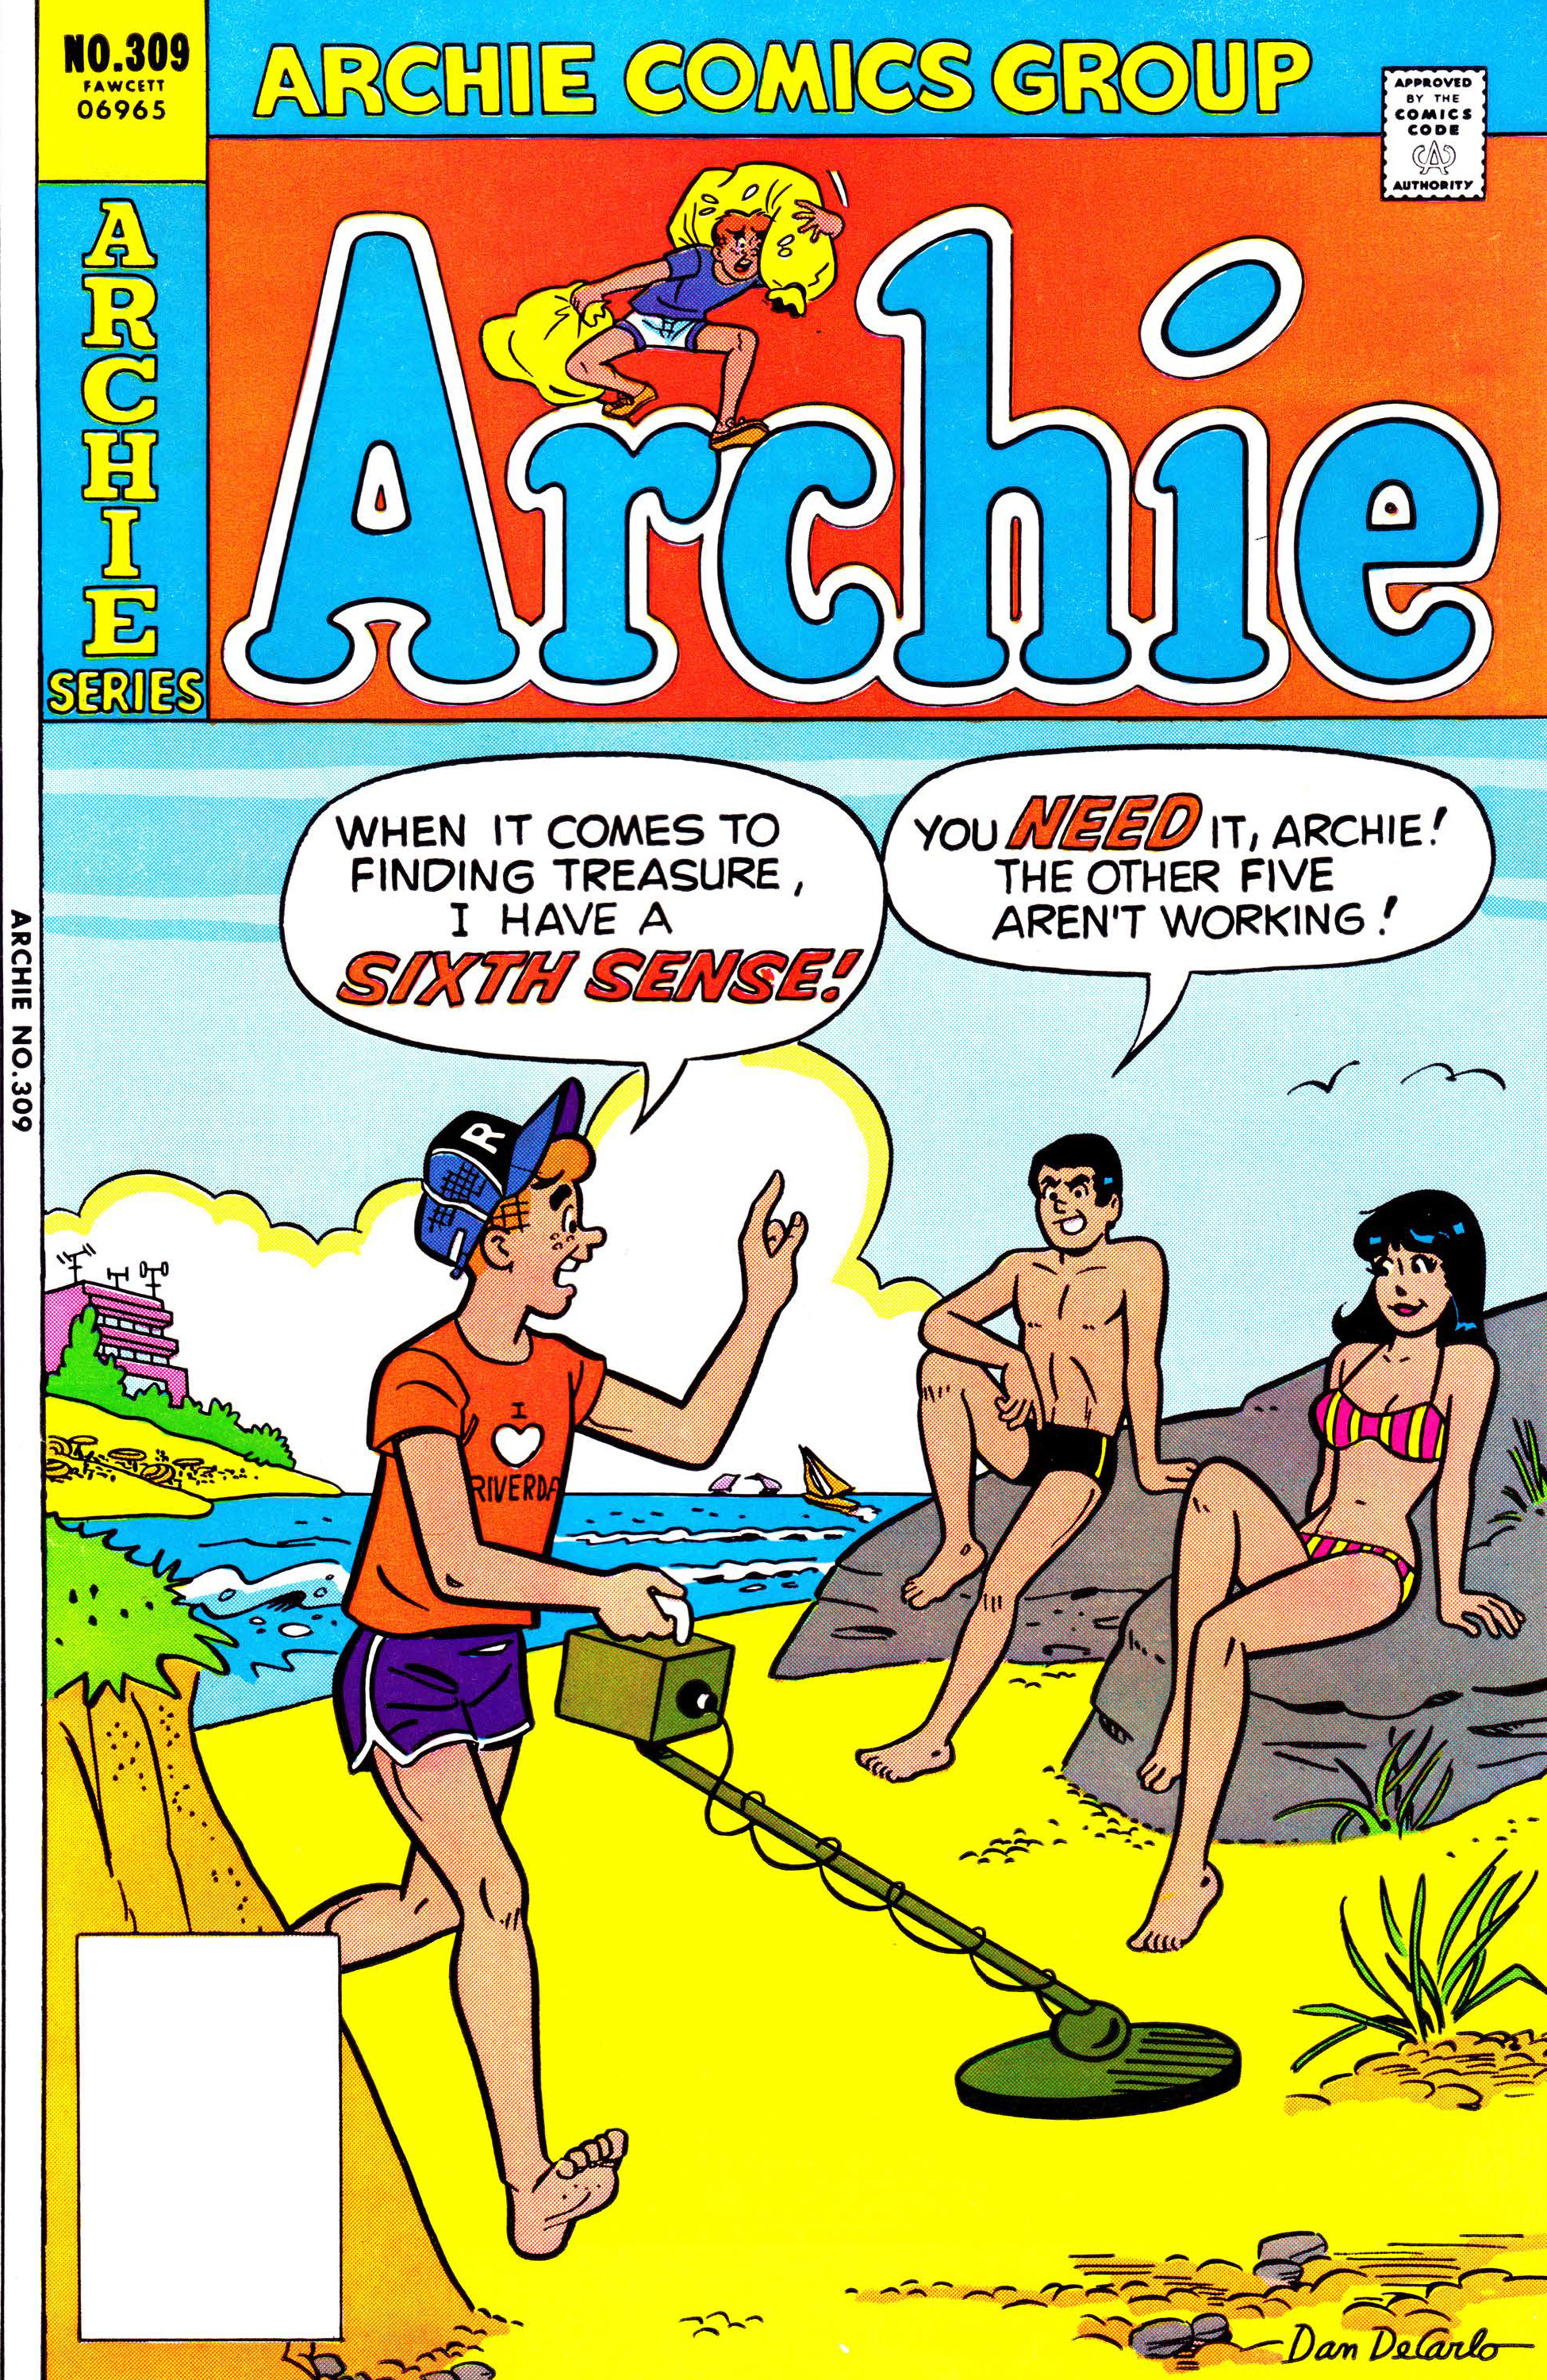 Read online Archie (1960) comic -  Issue #309 - 1